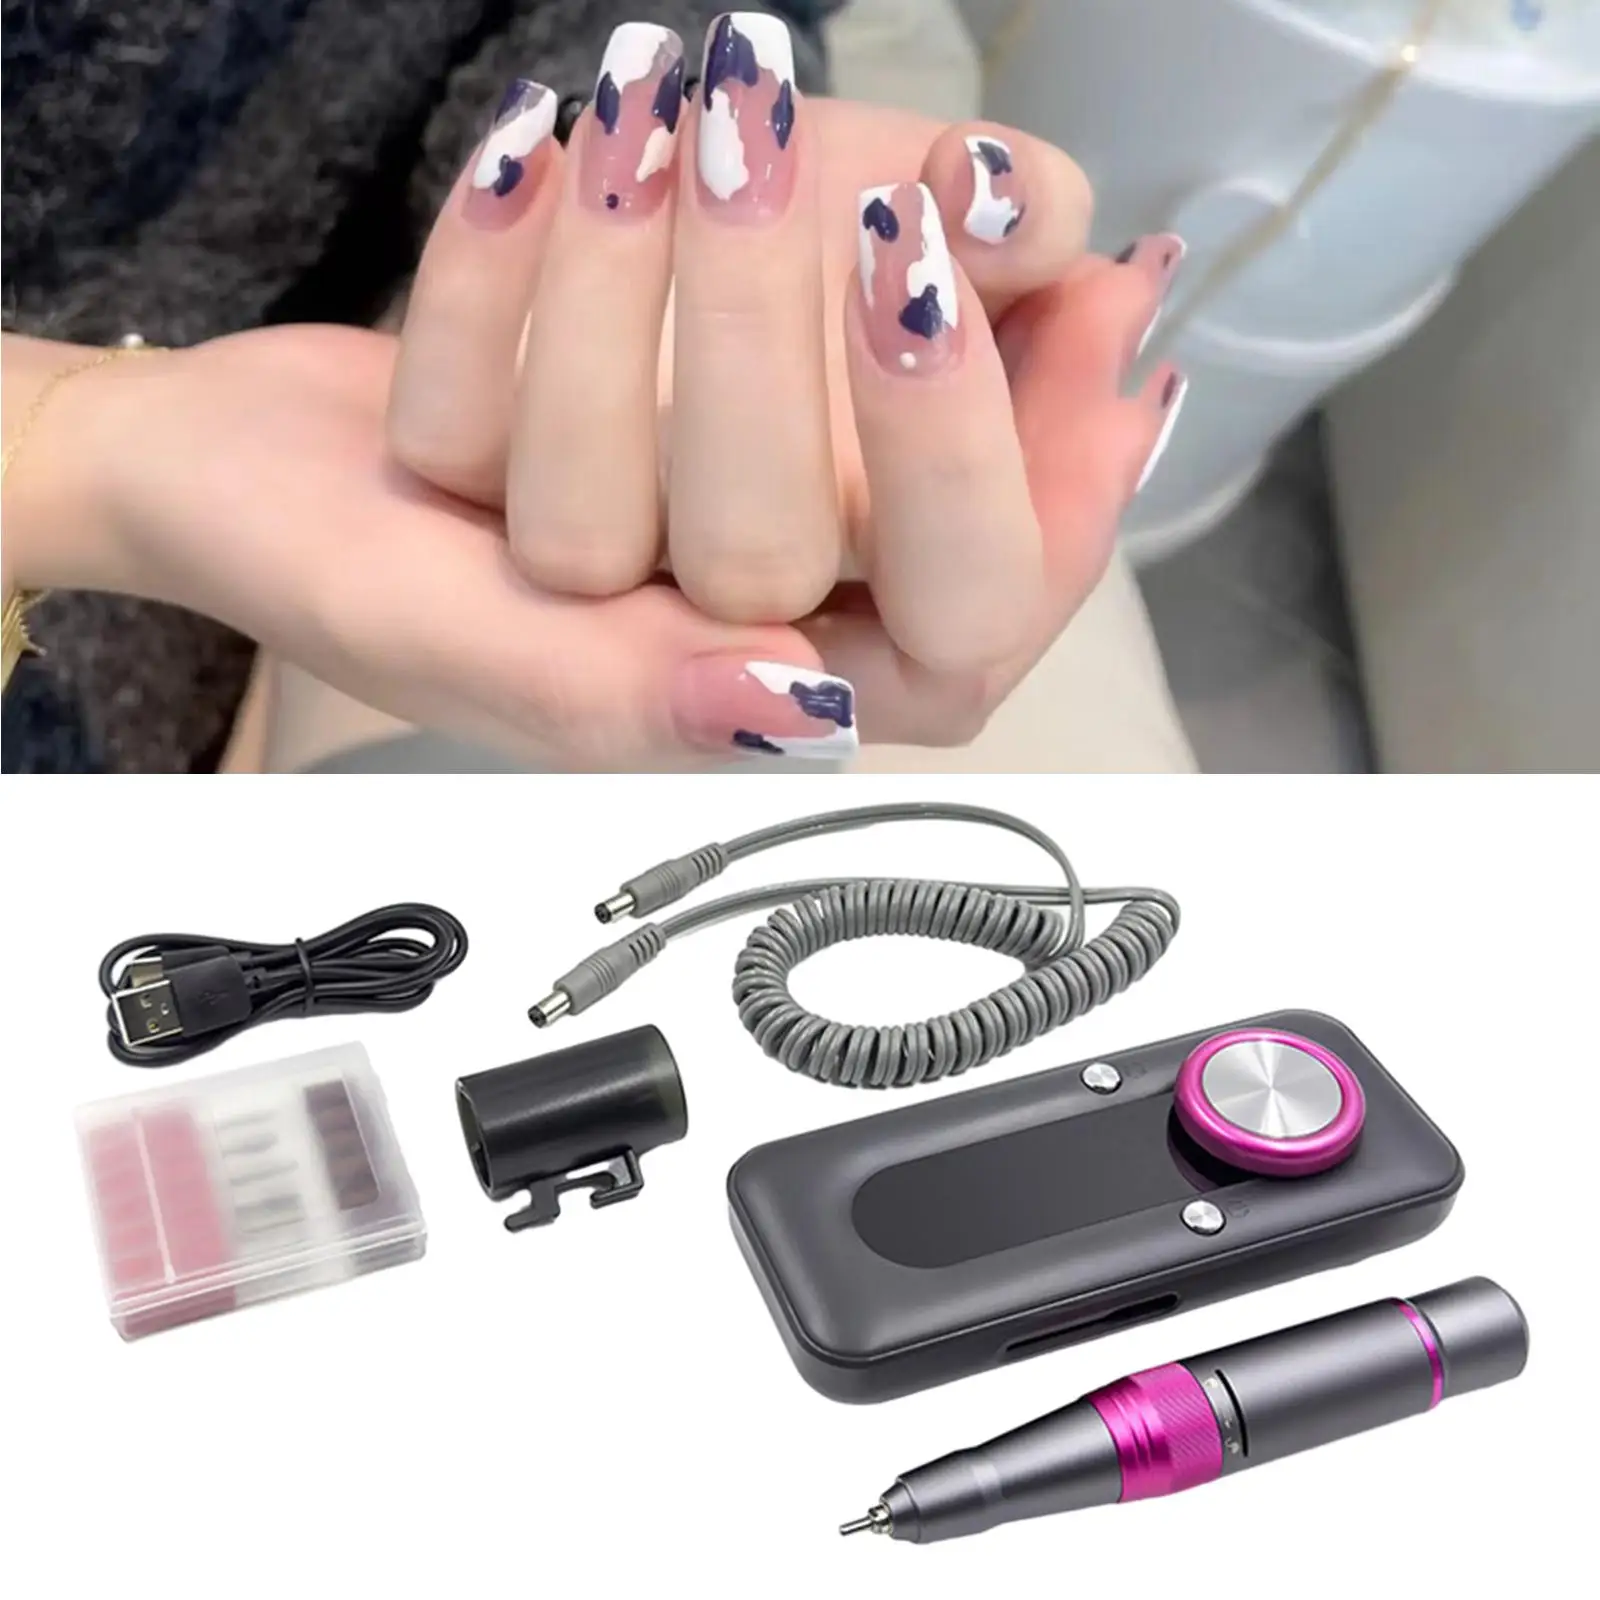 Electric Nail Drill Machine Portable Nail Drill Manicure Pedicure Kits for Carving Removing Grinding Trimming Home Salon Use